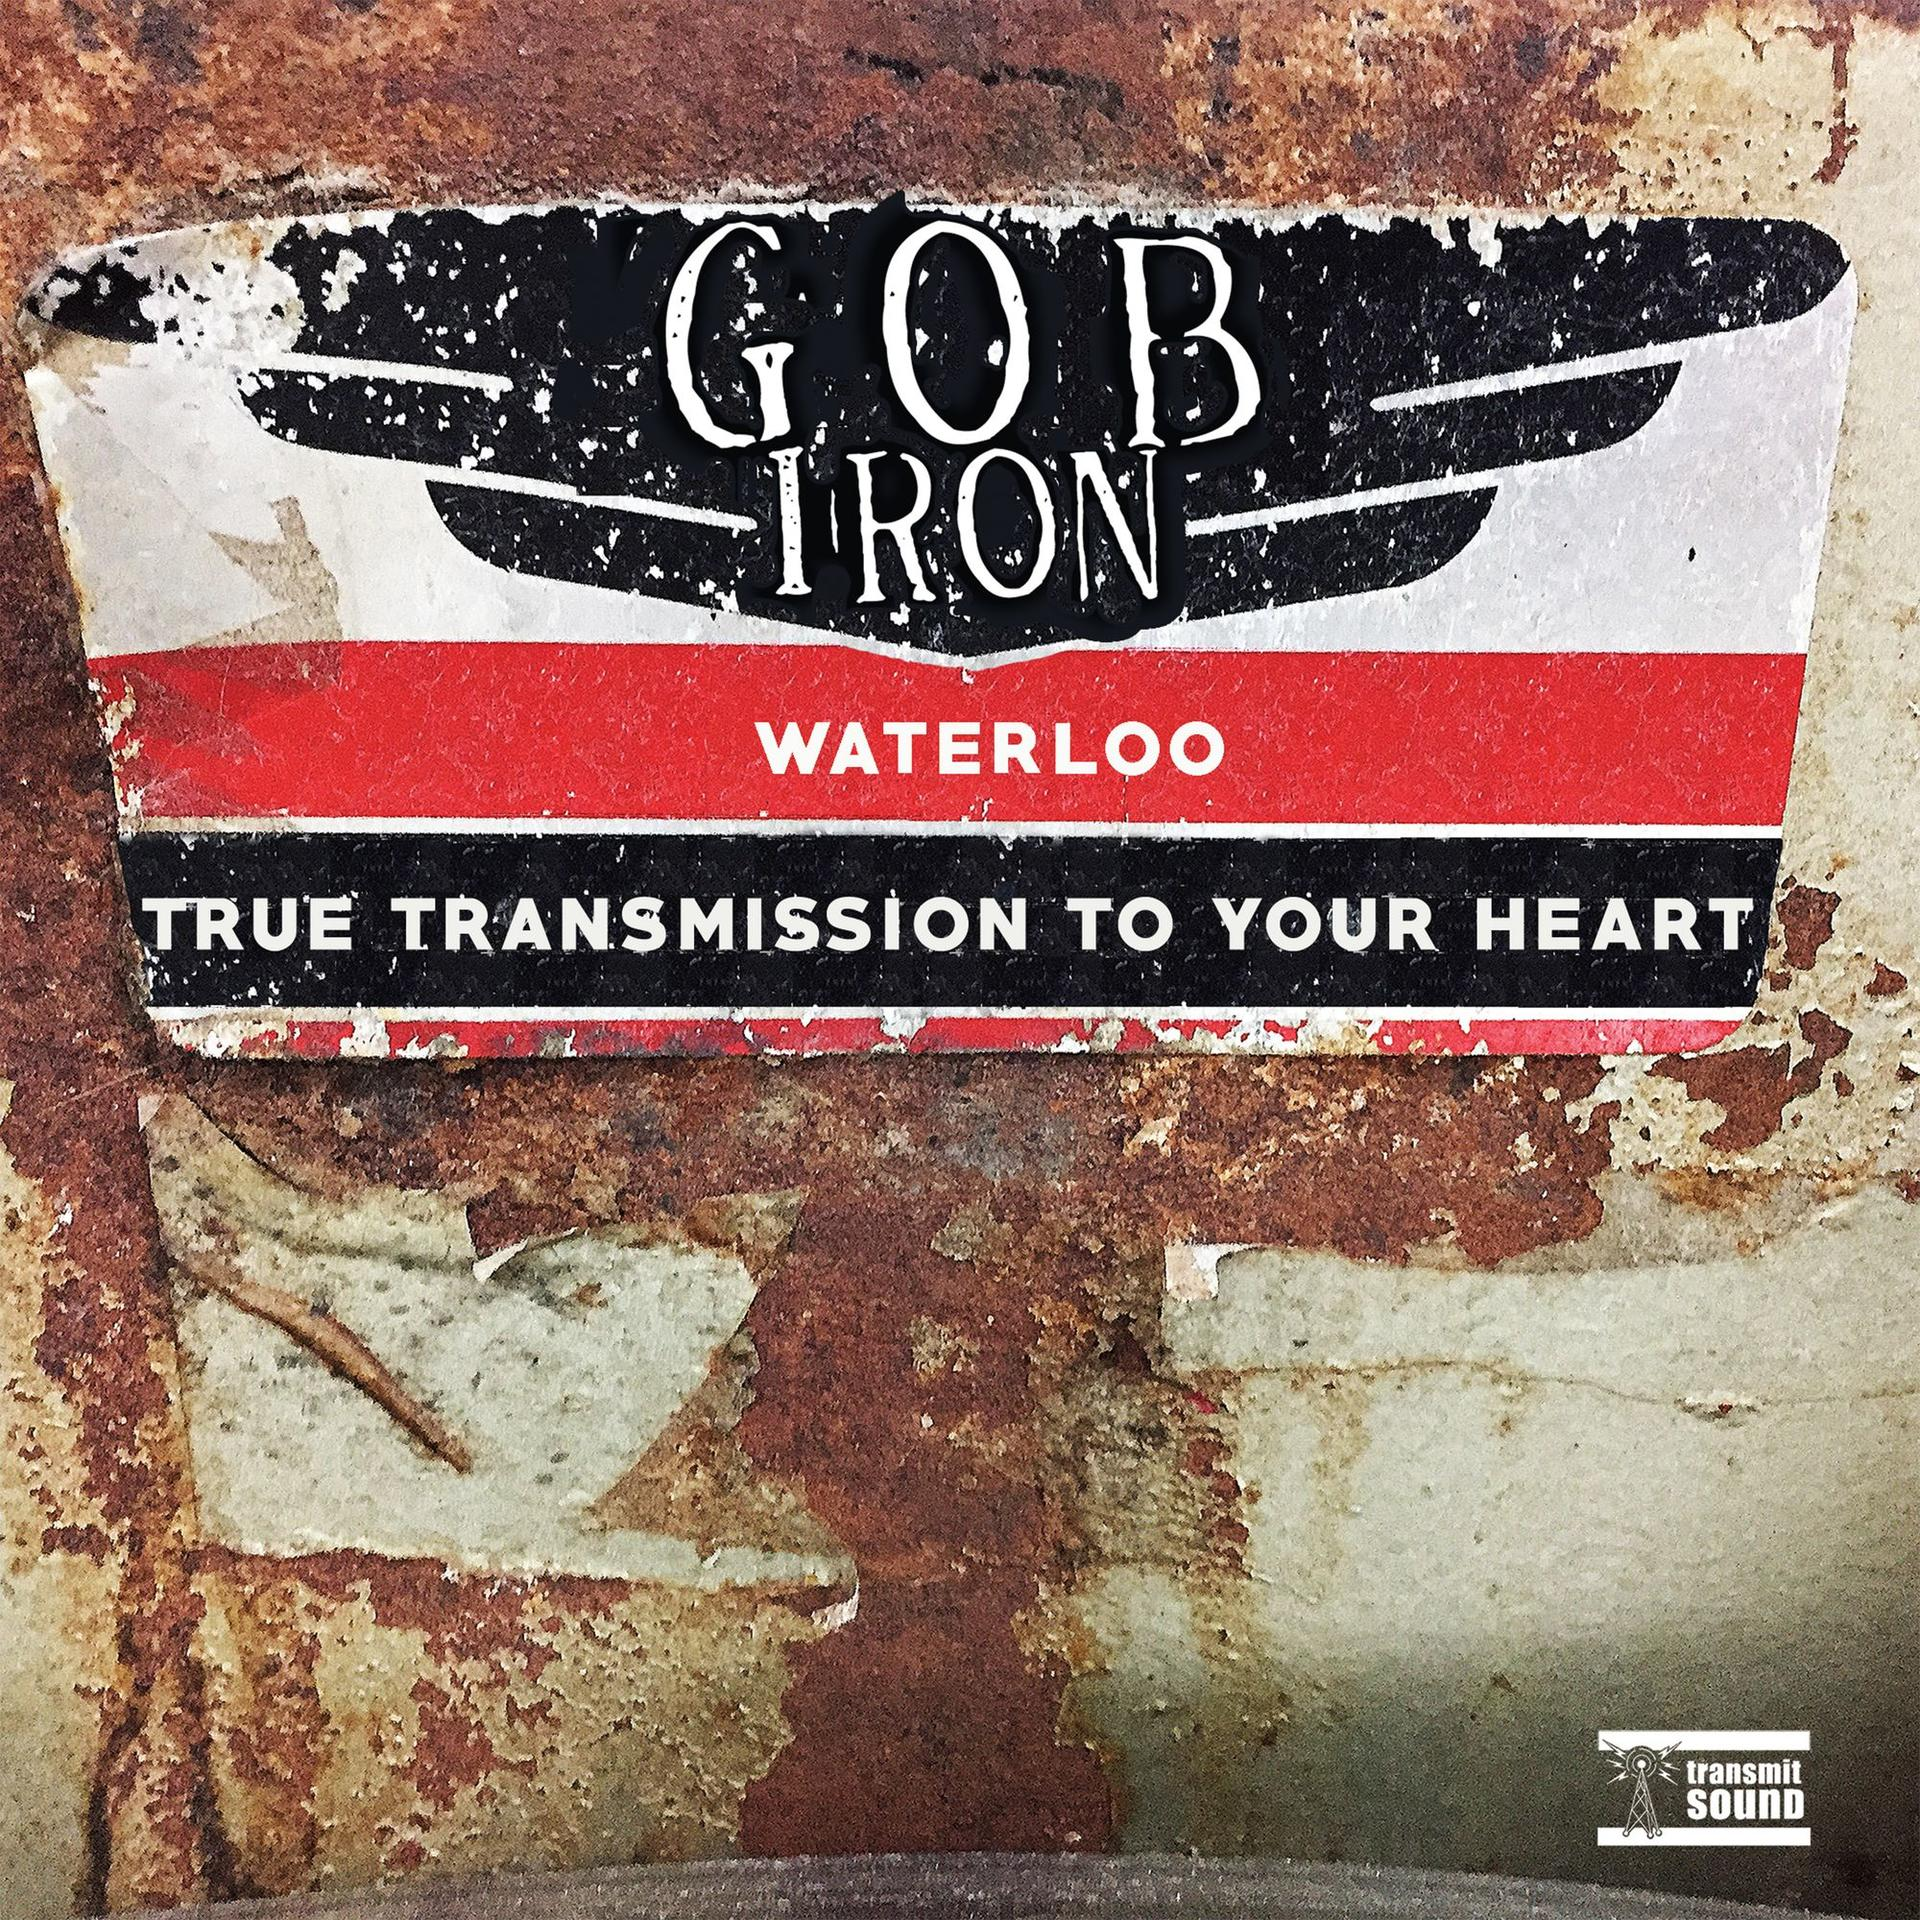 Gob Iron - 7-WATERLOO/TRUE HEART YOUR - (Vinyl) TO TRANSMISSION